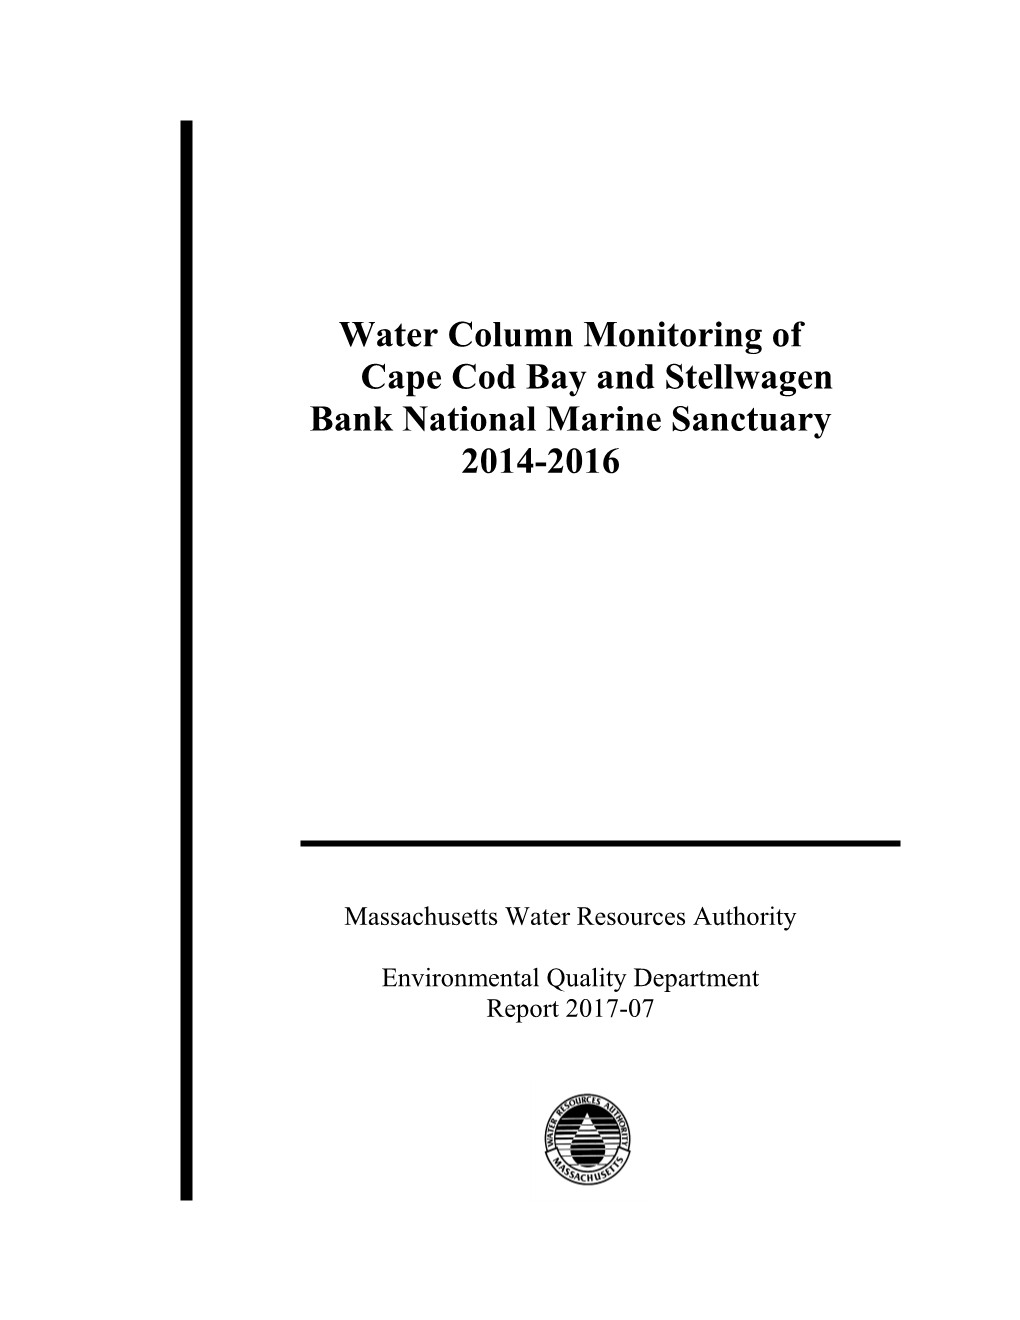 Water Column Monitoring of Cape Cod Bay and Stellwagen Bank National Marine Sanctuary 2014-2016